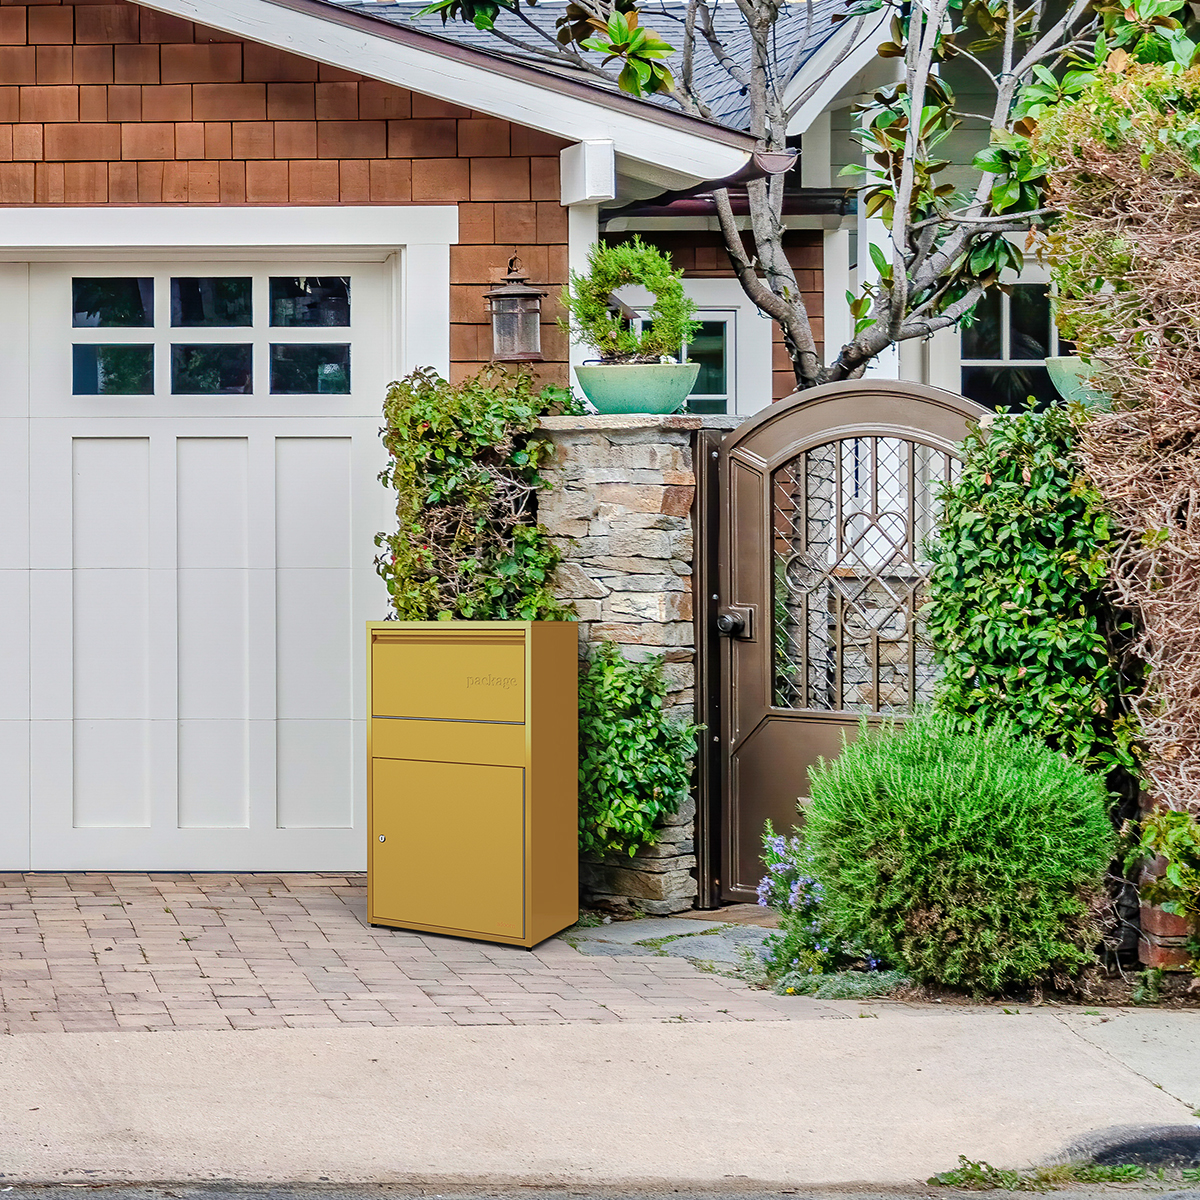 Secure Package Delivery Boxes Are The Next Big Thing In Home Security